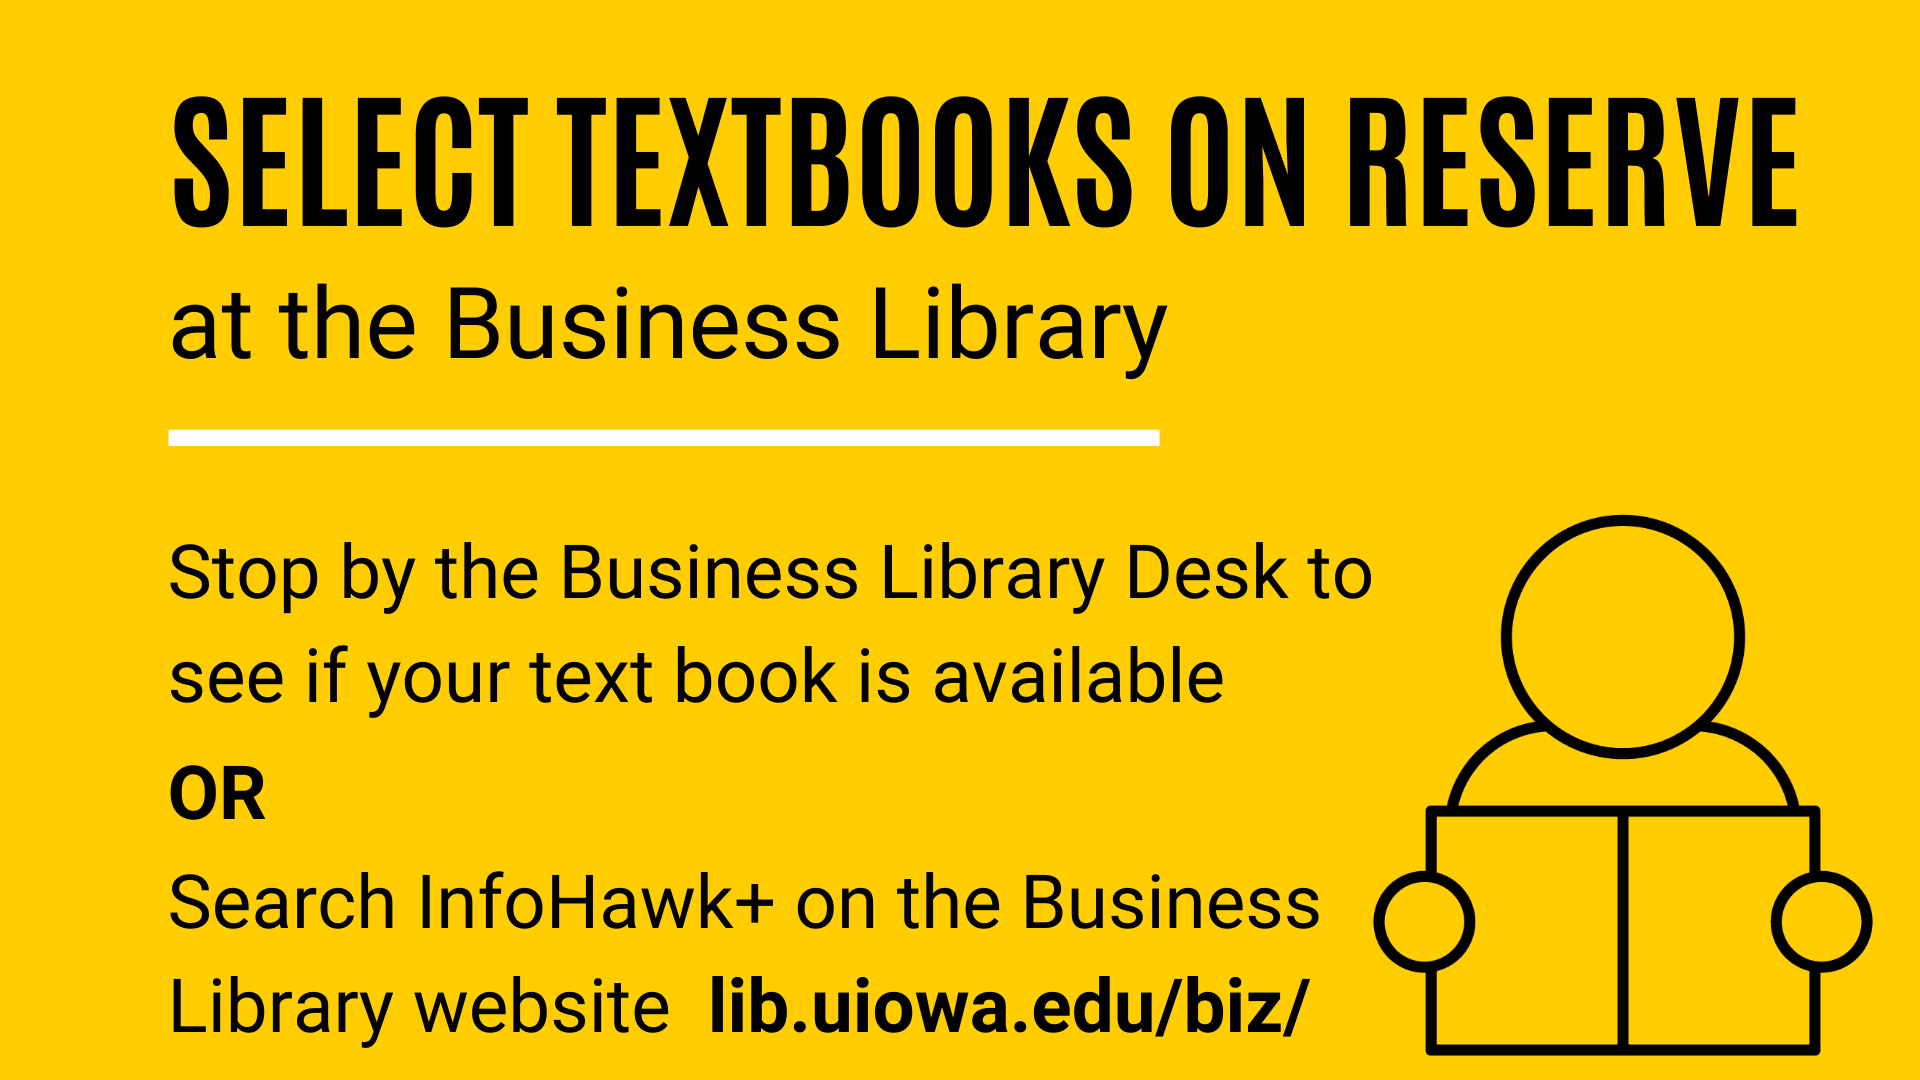 Select textbooks on Reserve